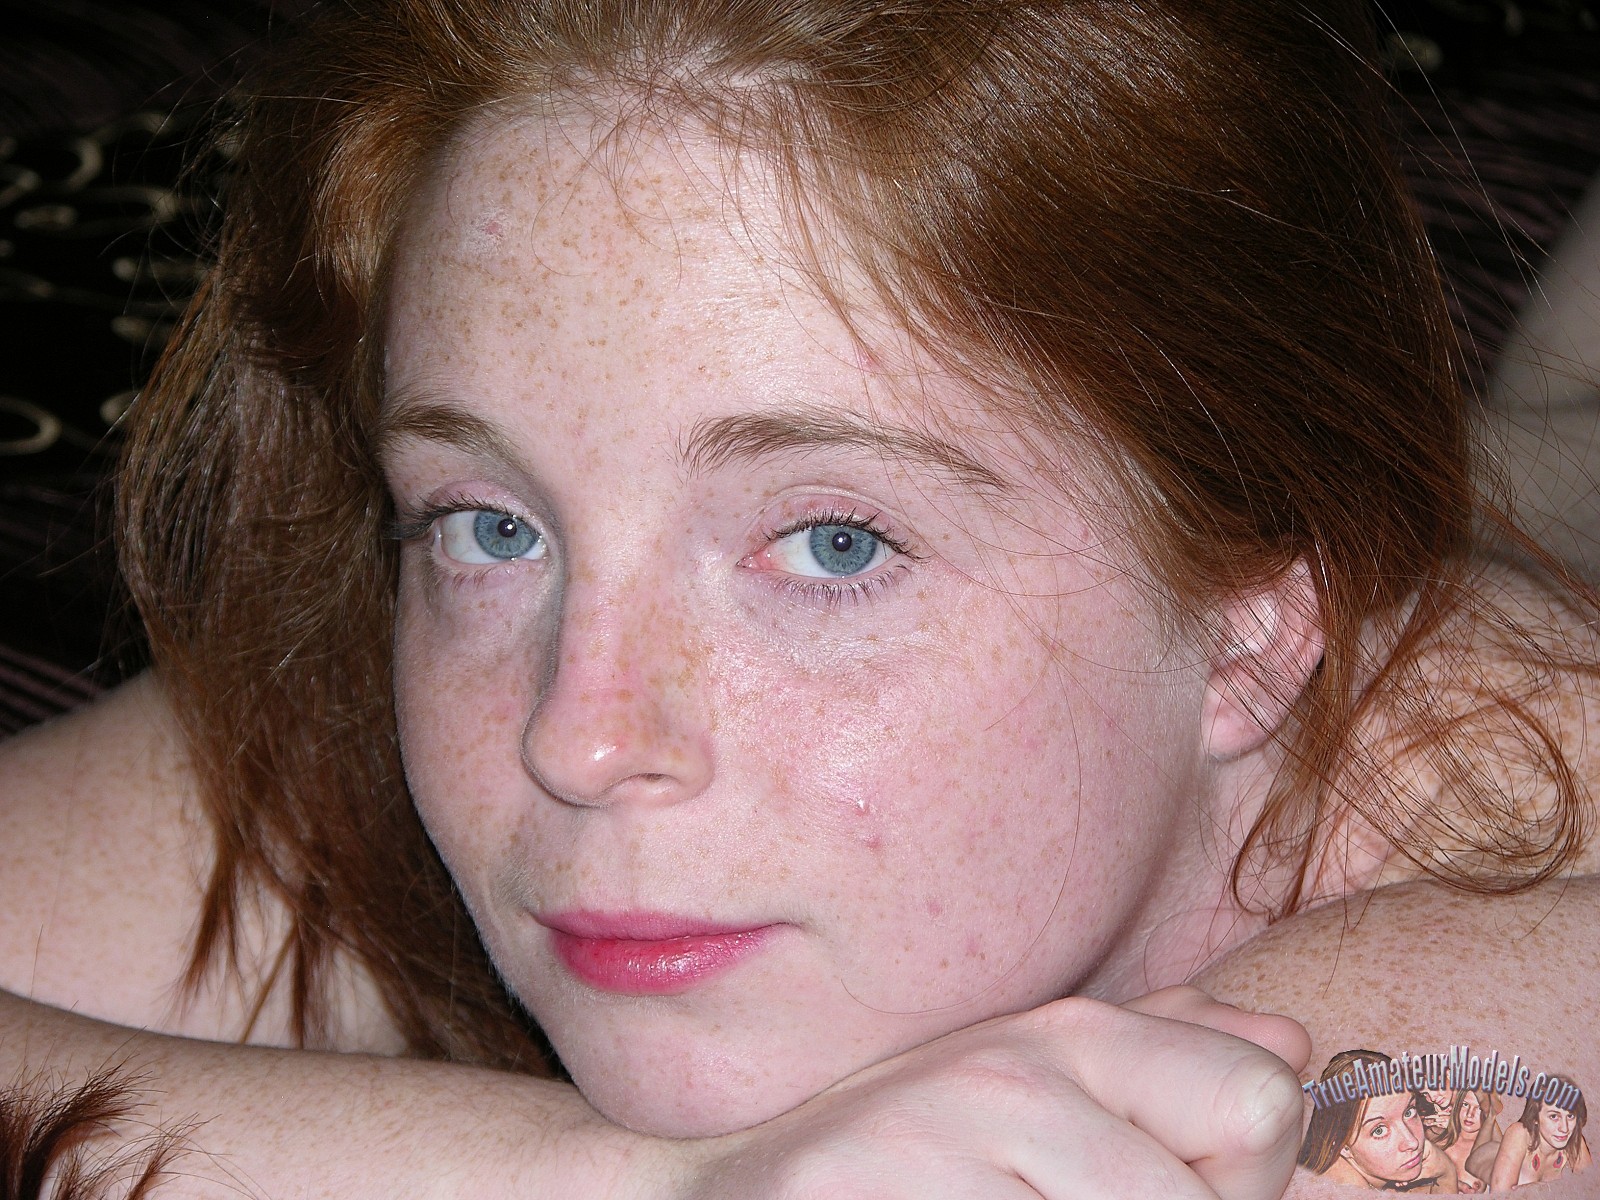 Rehdead Amateur Teen With Freckles Shows Hairy Pussy